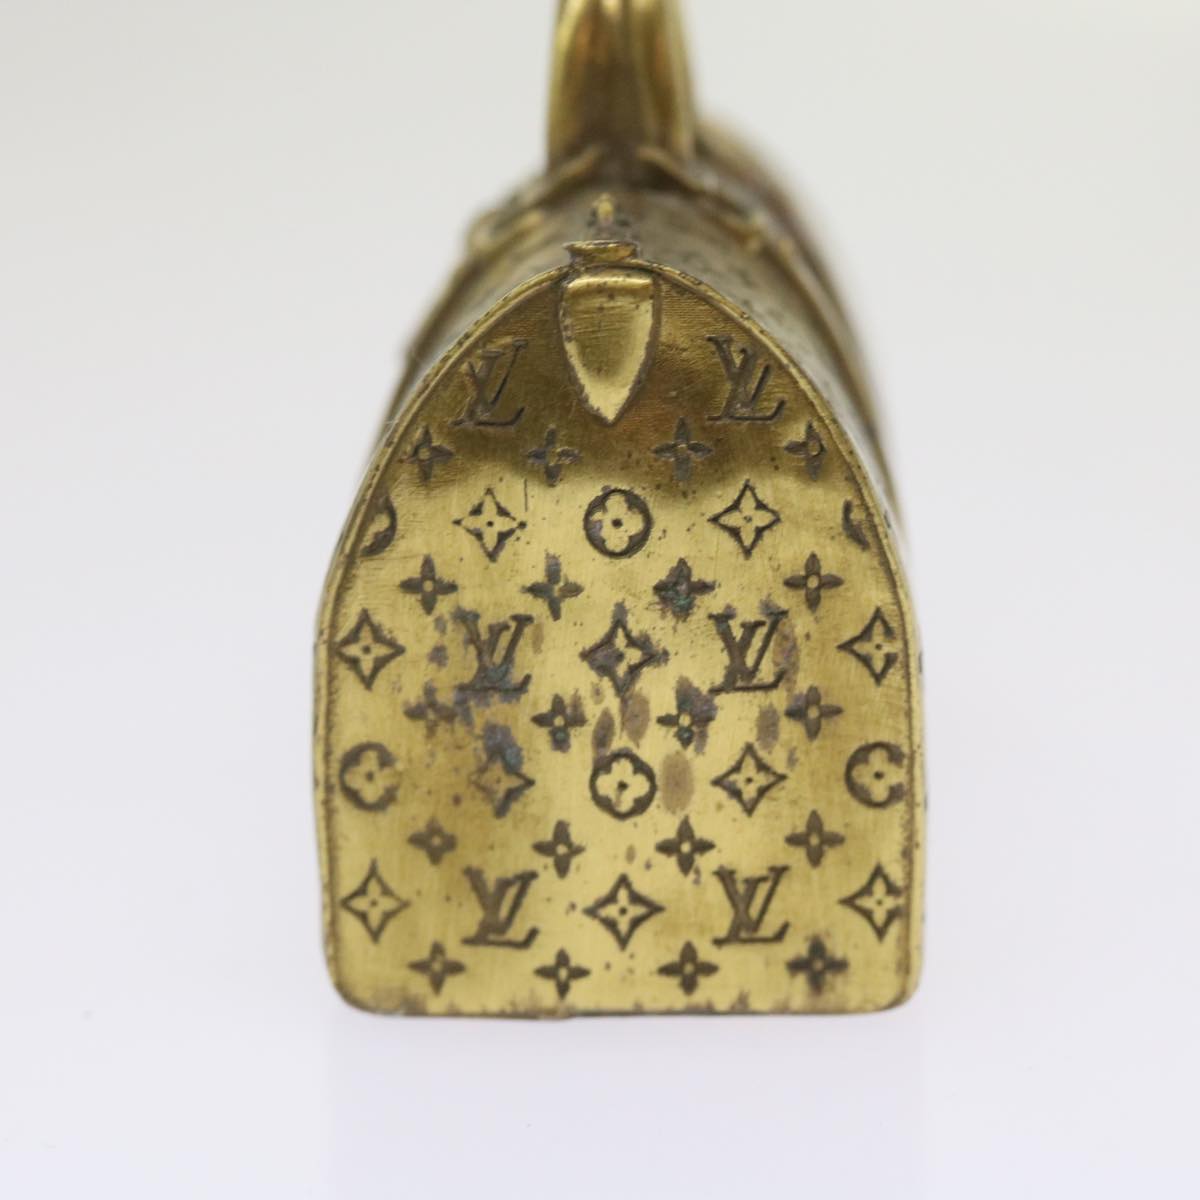 LOUIS VUITTON Paper weight Gold Tone LV Auth 67242